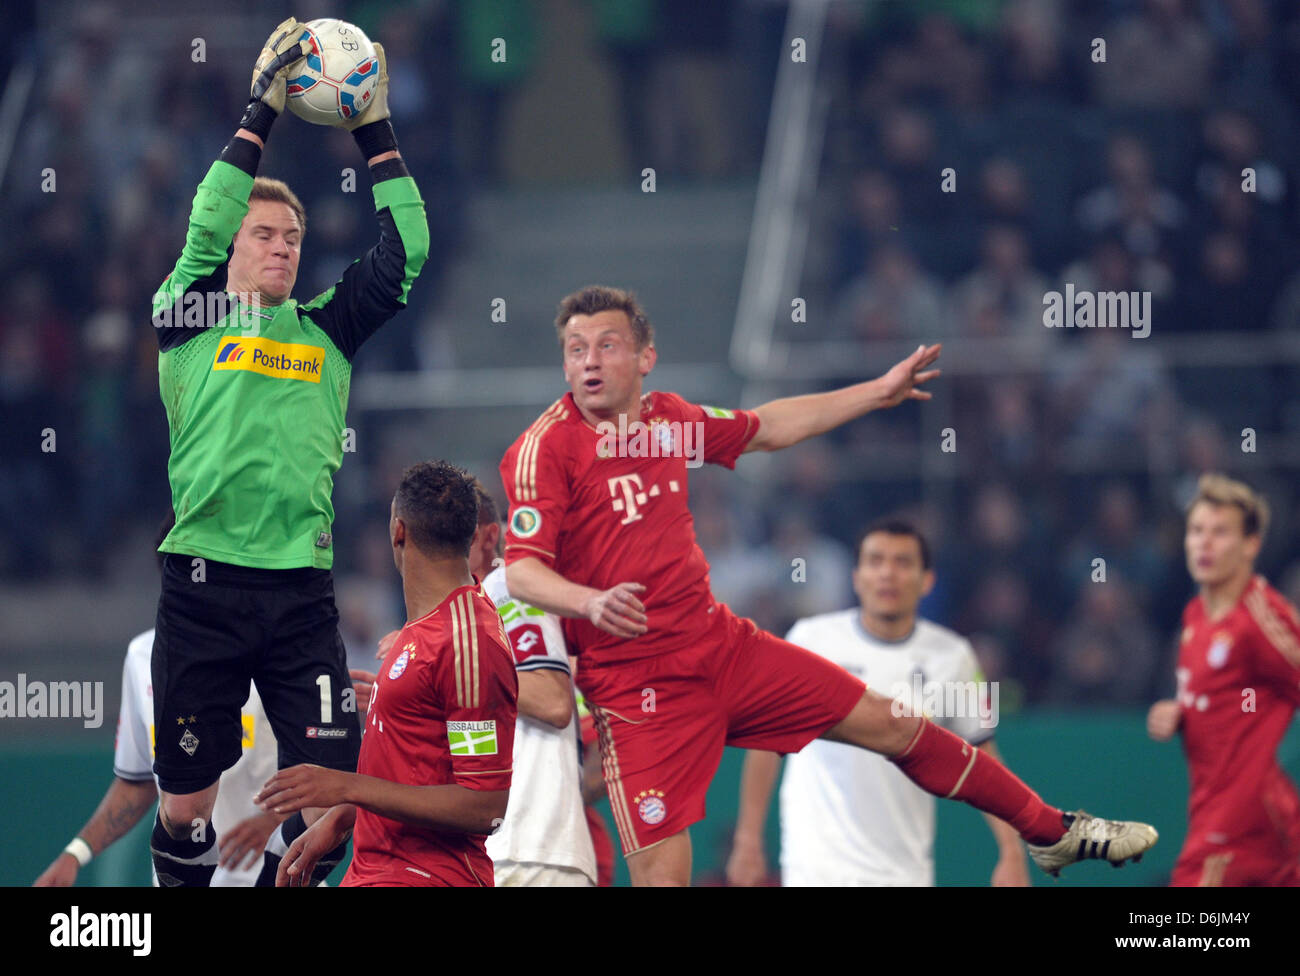 Munich's Ivica Olic (R) vies for the ball with Moenchengladbach's keeper Marc-Andre ter Stegen during the DFB Cup semi-final match between Borussia Moenchengladbach and Bayern Munich in Moenchengladbach, Germany, 21 March 2012. Photo: Federico Gambarini Stock Photo